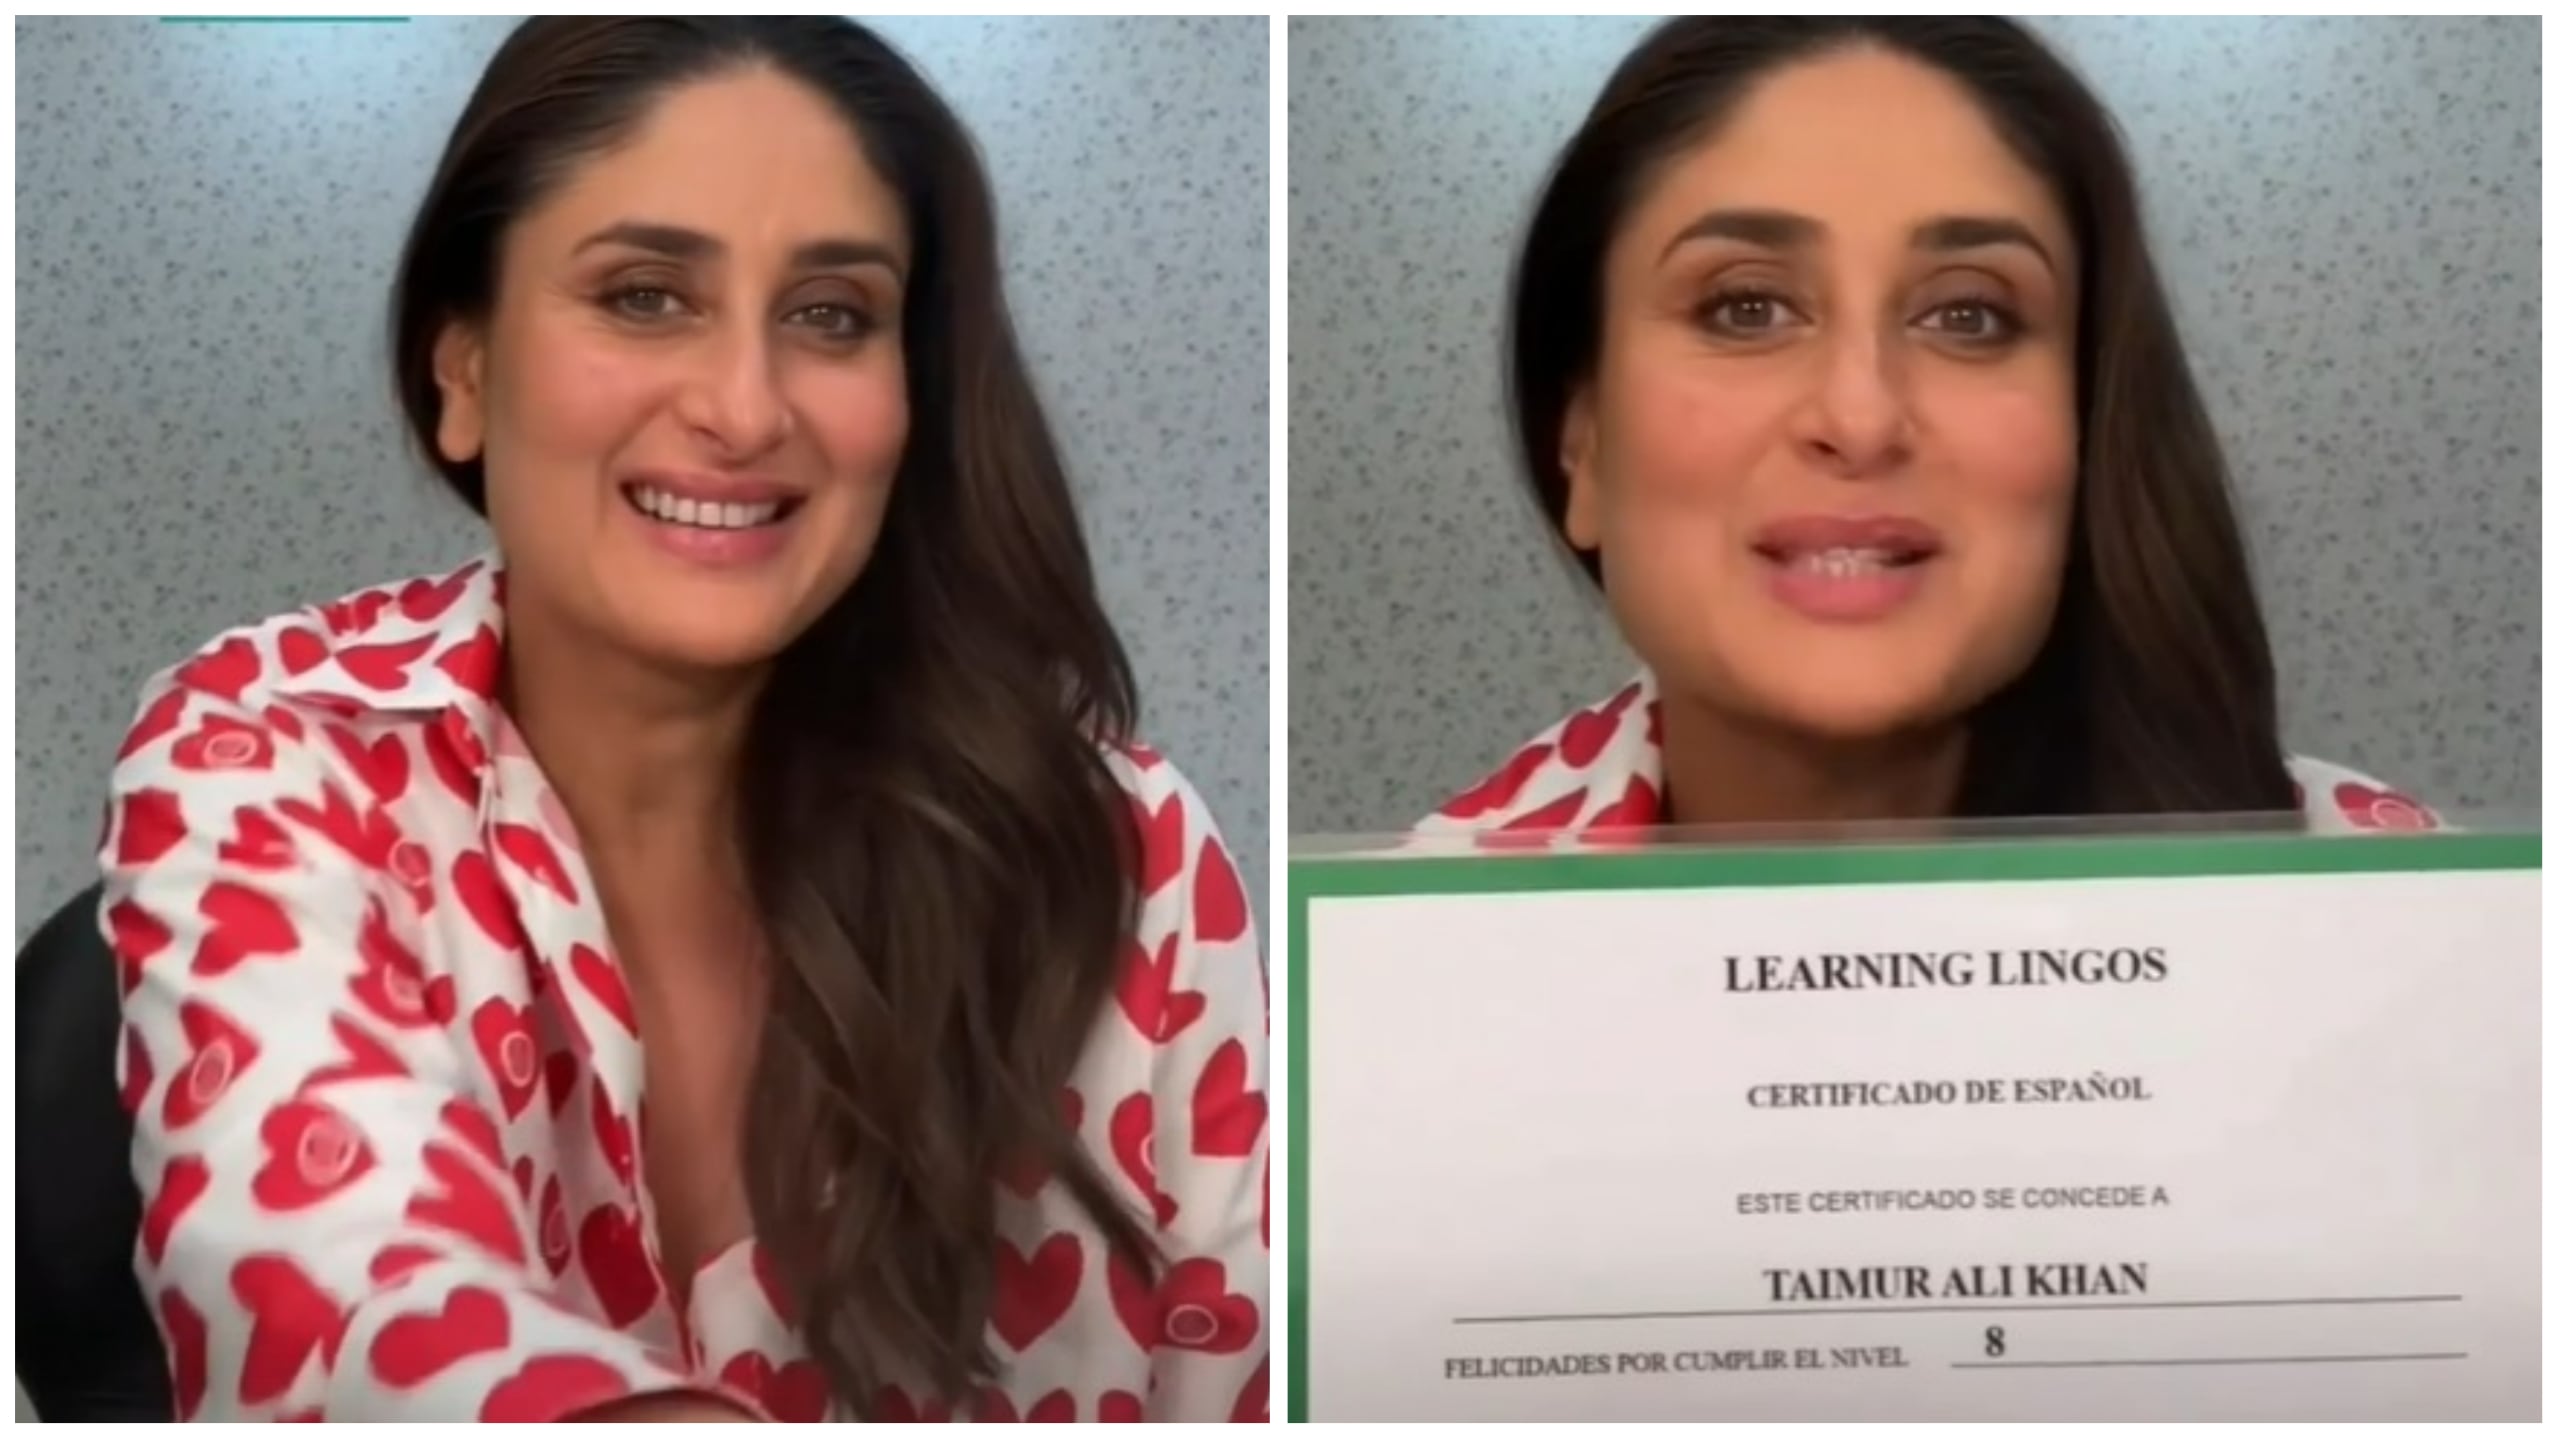 Kareena Kapoor calls herself 'proud mommy', shows off Taimur's certificate  | Bollywood - Hindustan Times